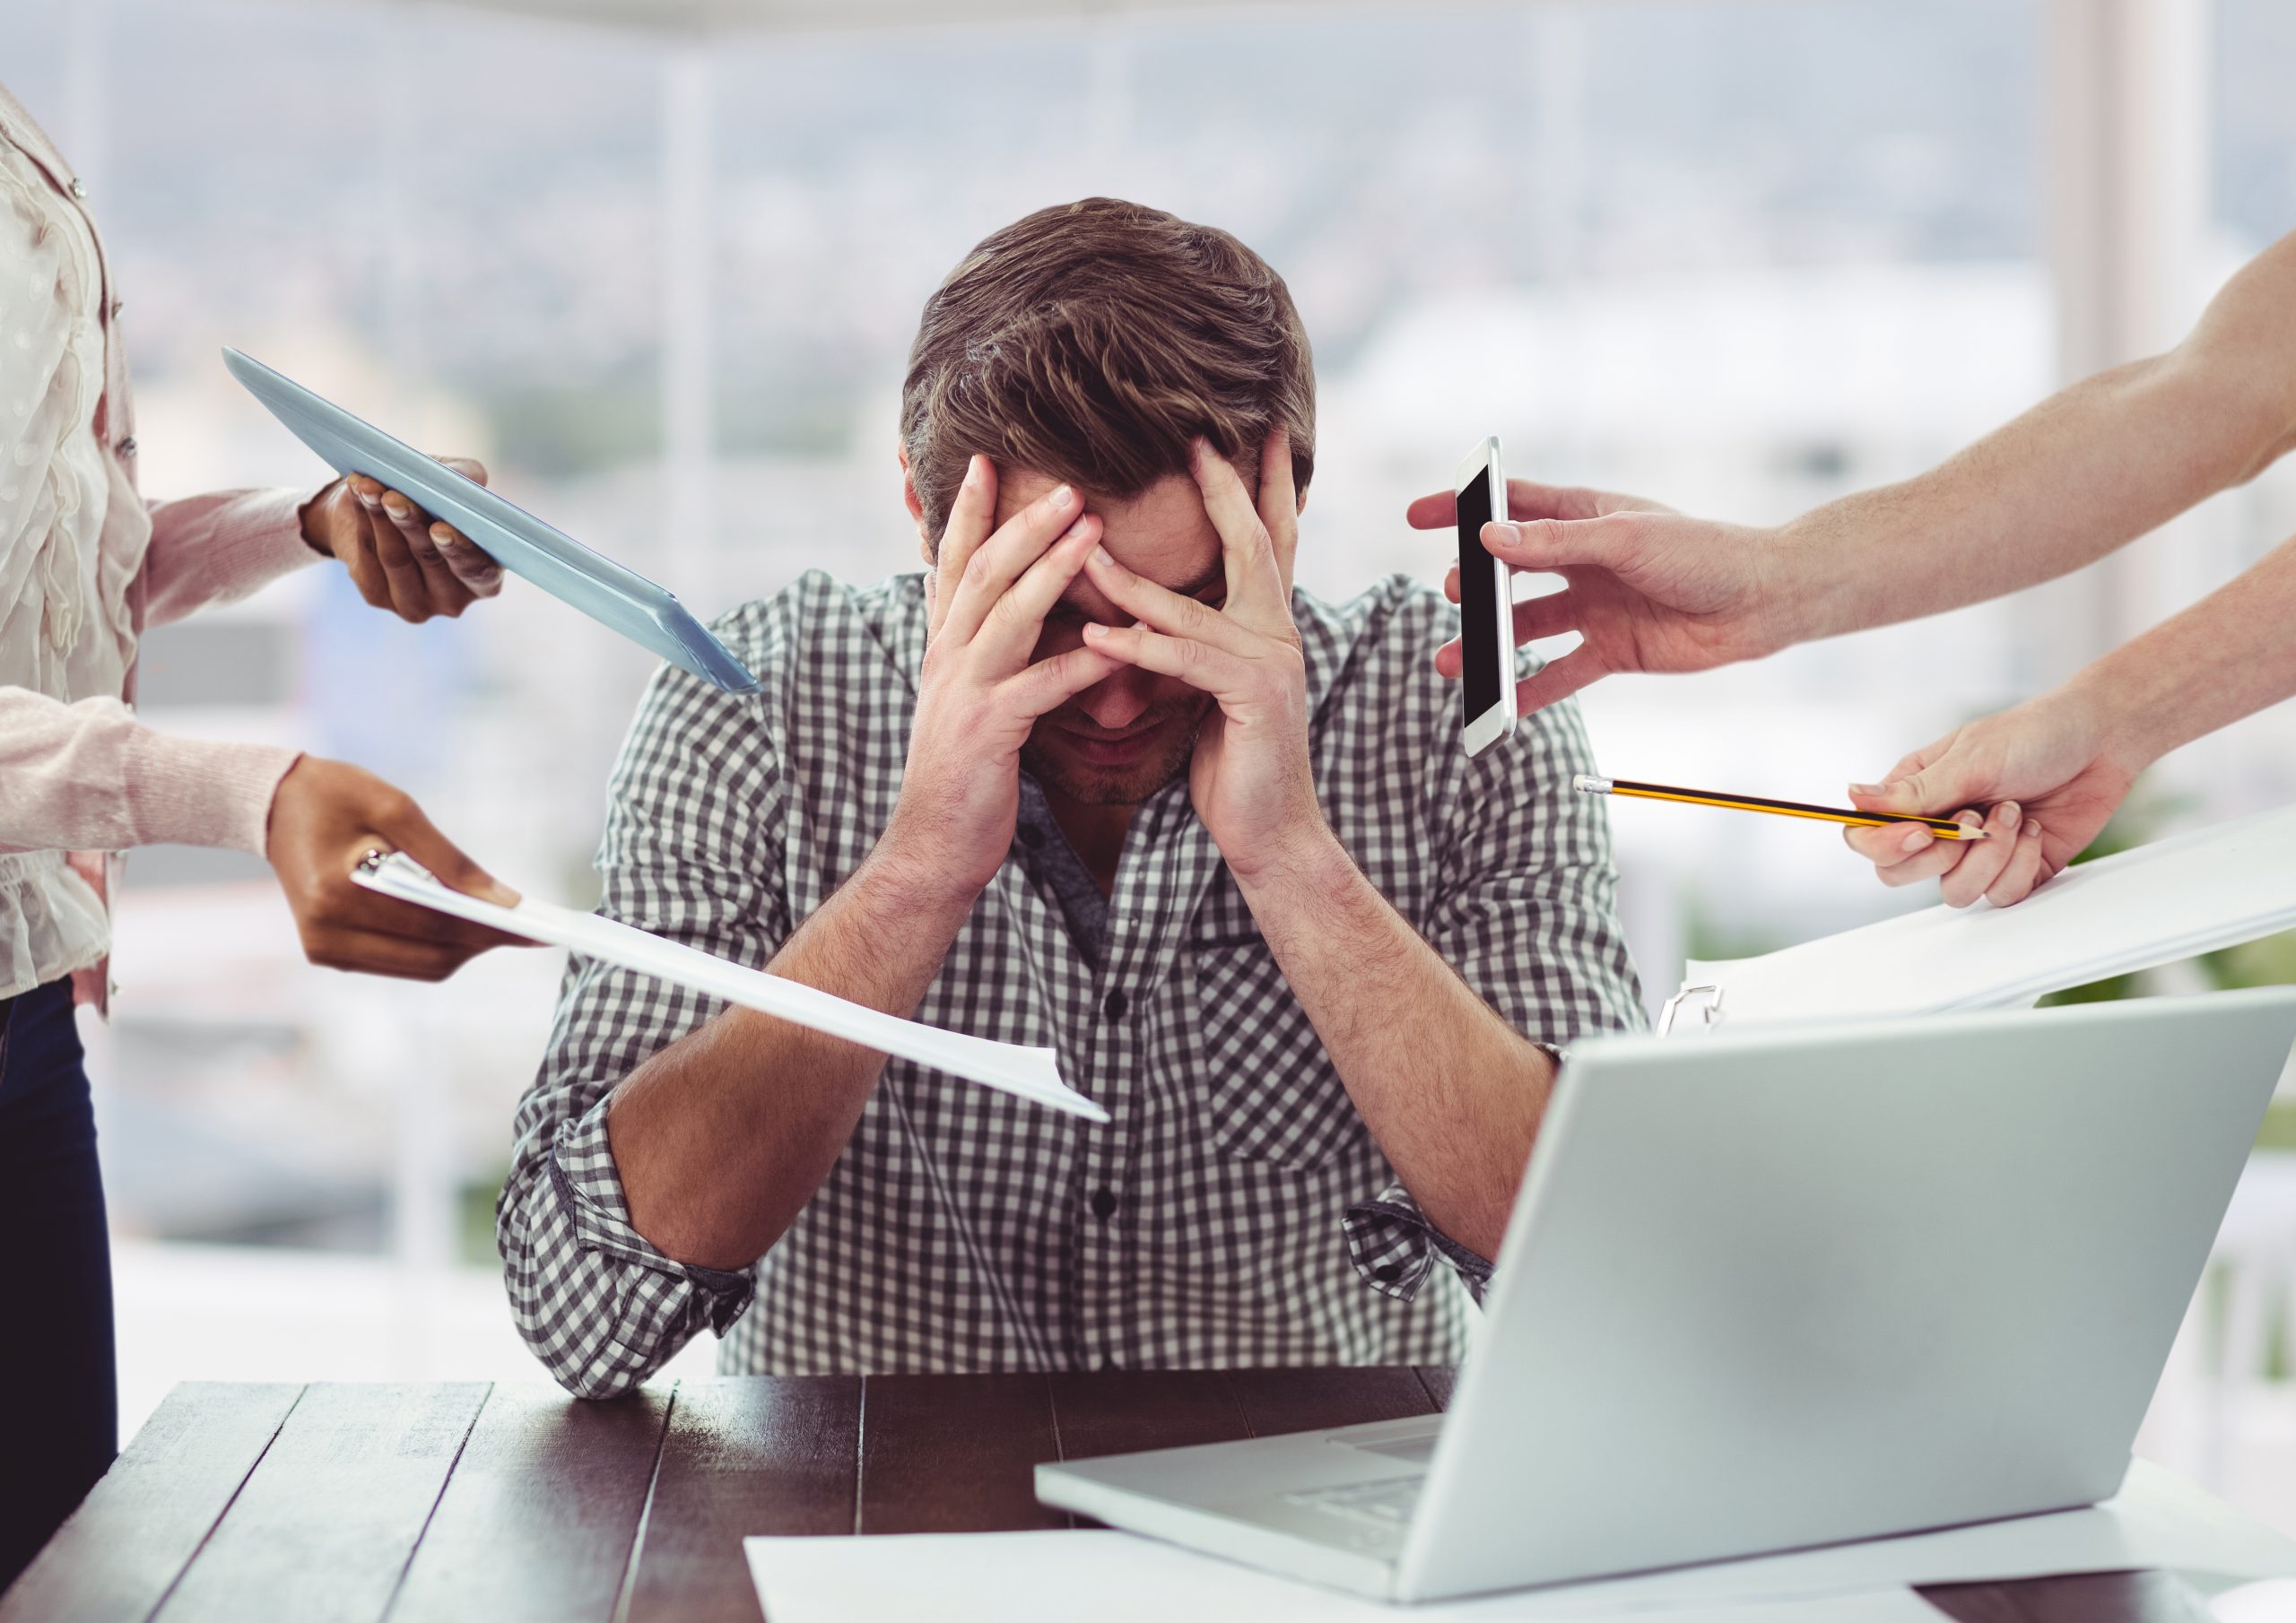 A man feeling burnout in the workplace